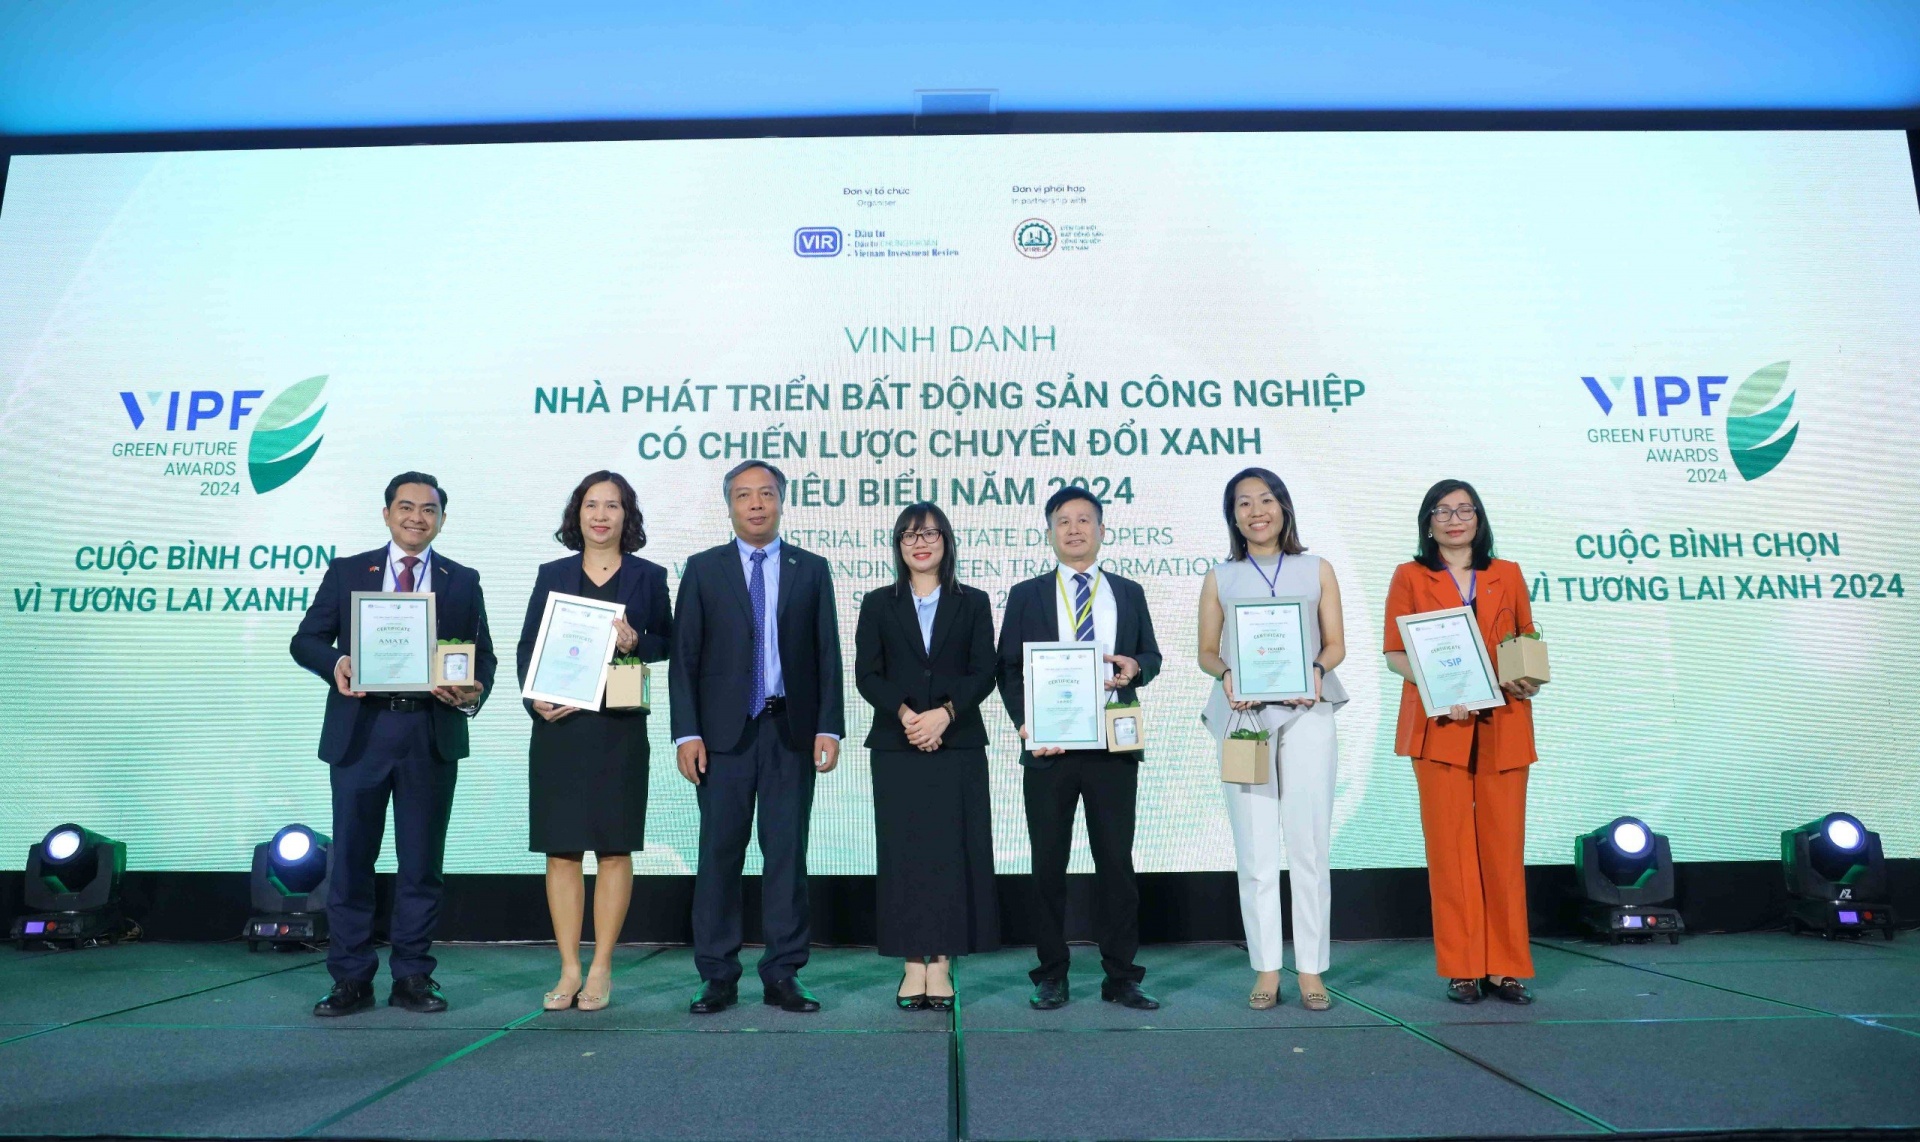 VIR and VIREA honour industrial property developers for outstanding green transformation strategies